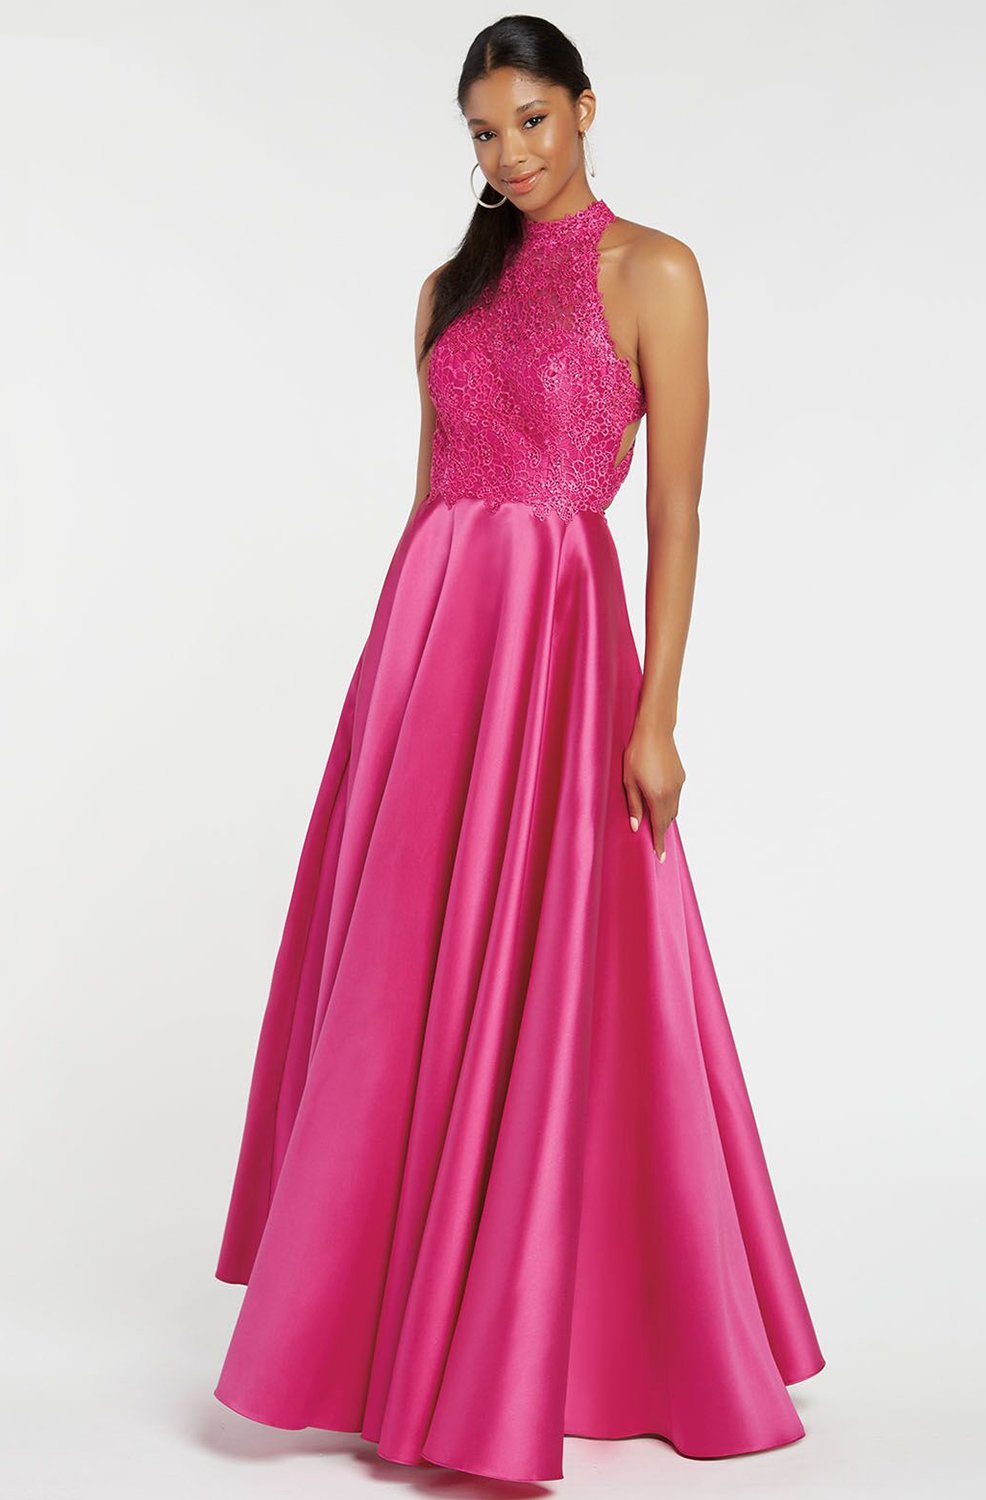 Alyce Paris - 60331 Halter Lace Appliqued Mikado Racerback Prom Gown In Pink and Red